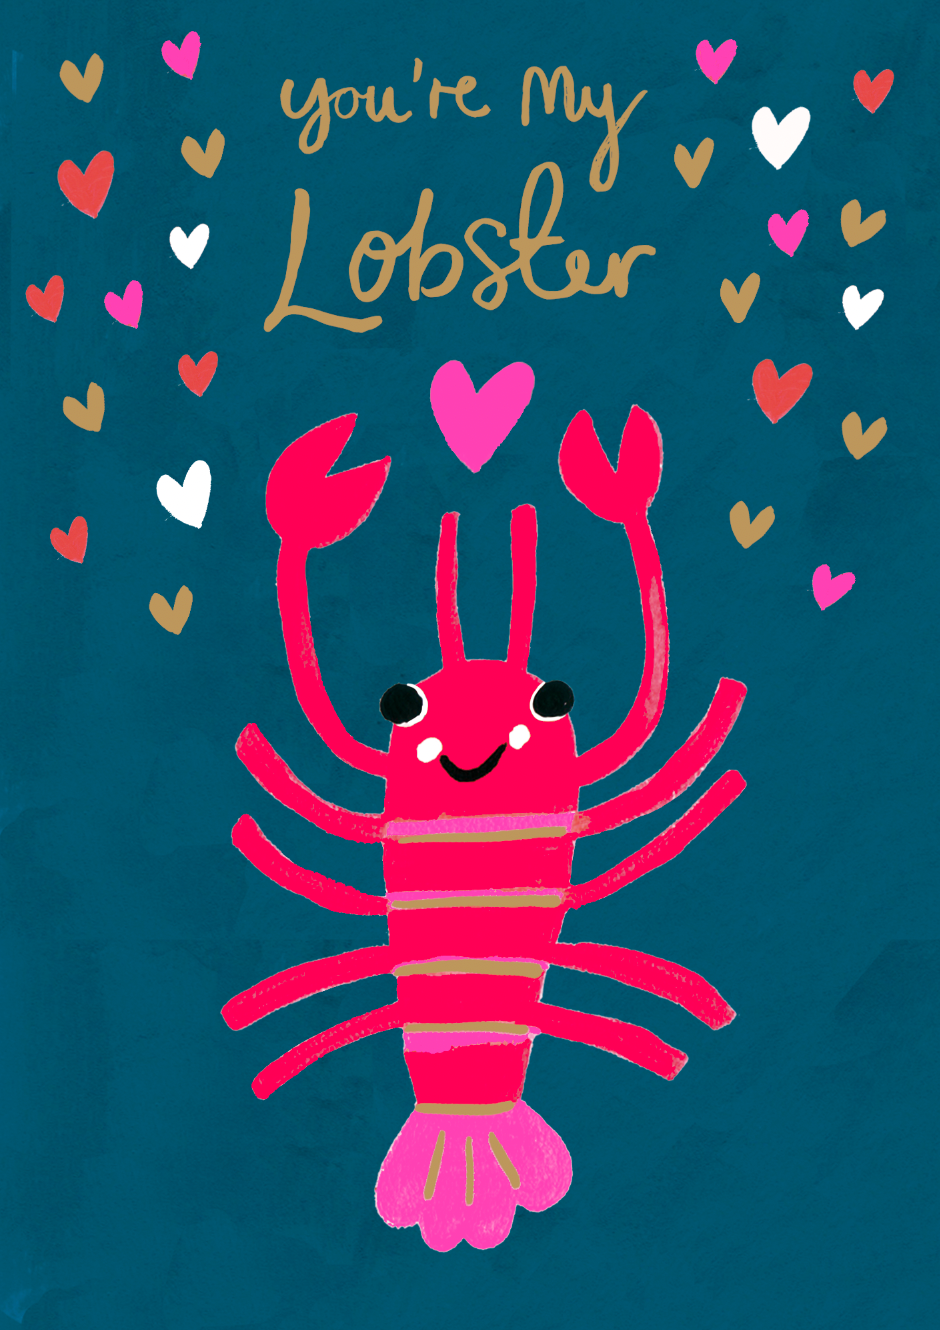 You're My Lobster Playful Valentine Card by penny black